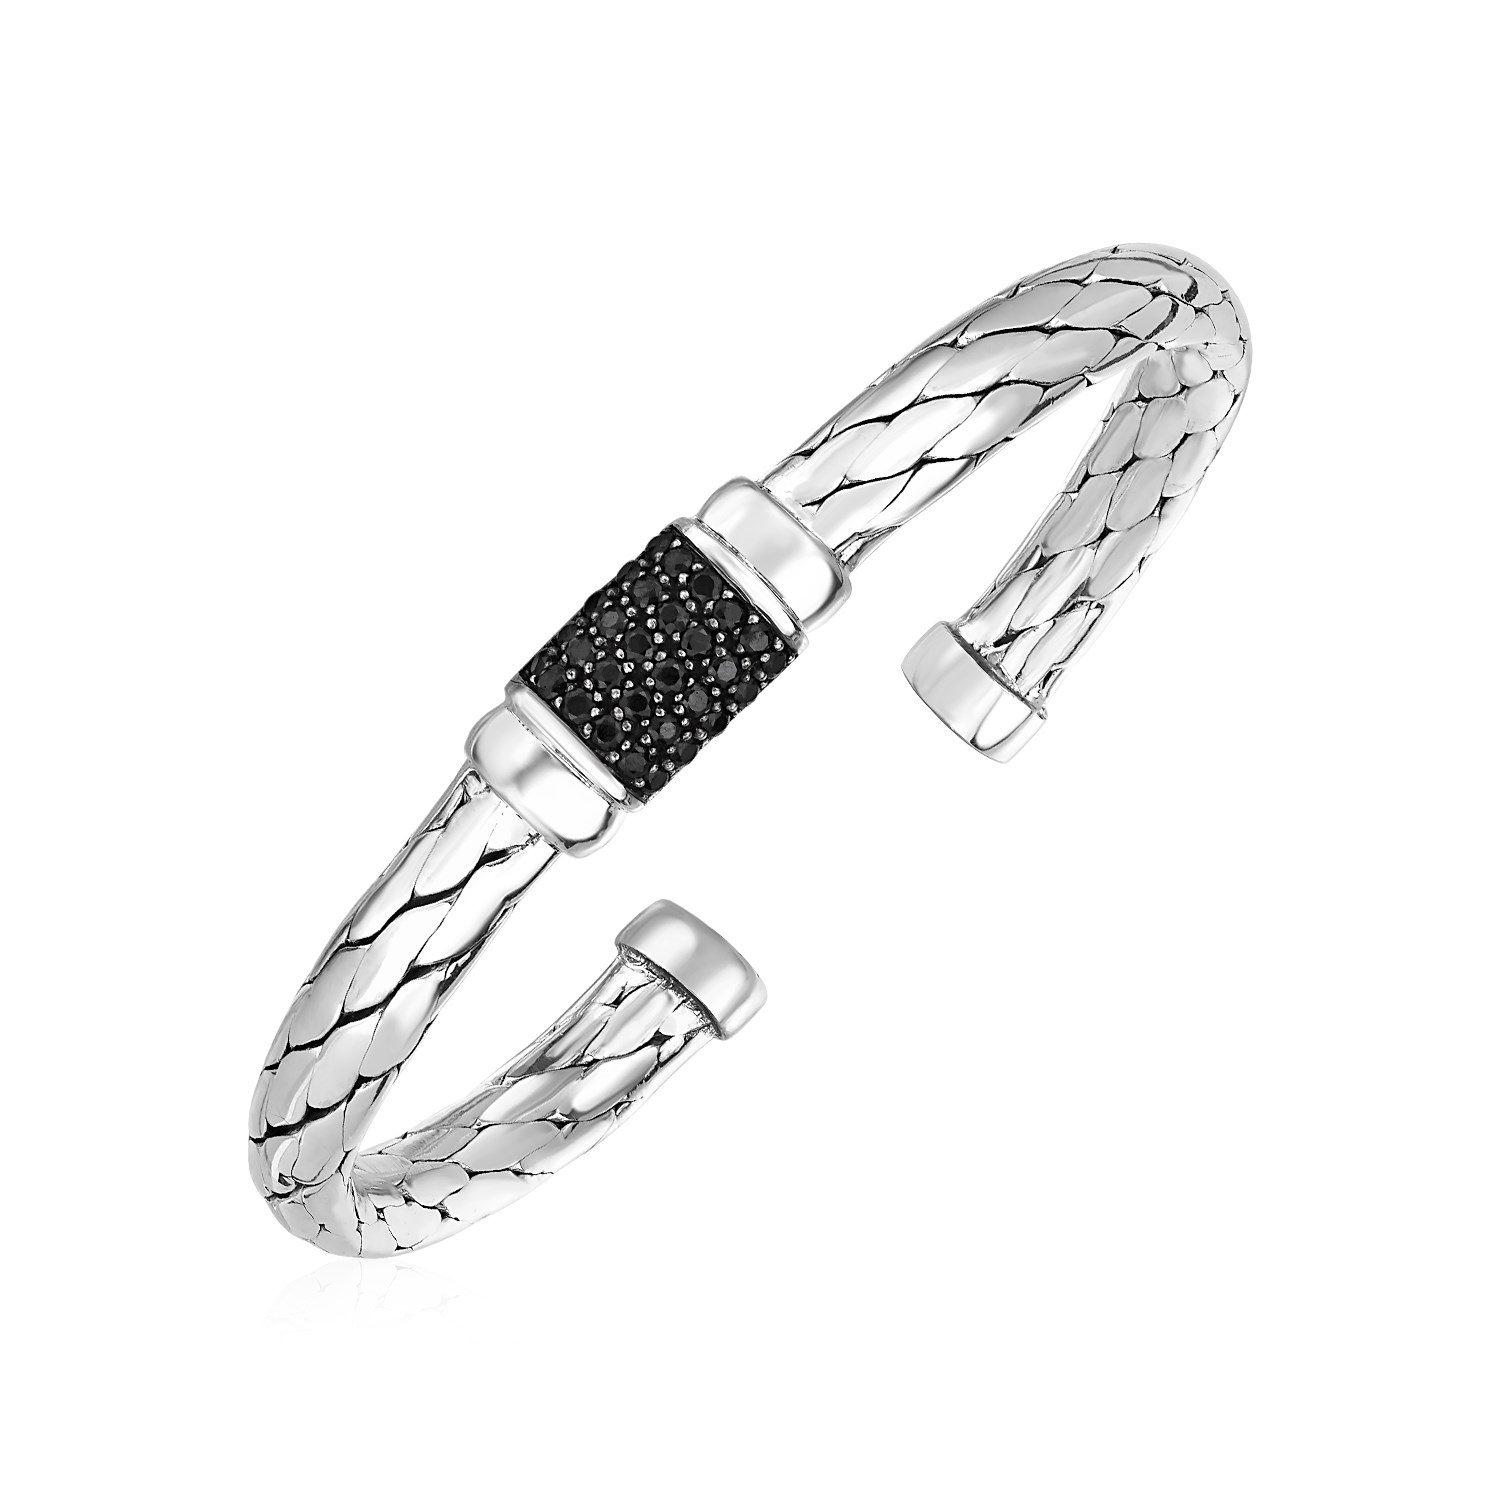 Woven Rope Cuff Bracelet with Black Sapphire Accents in Sterling Silver ...